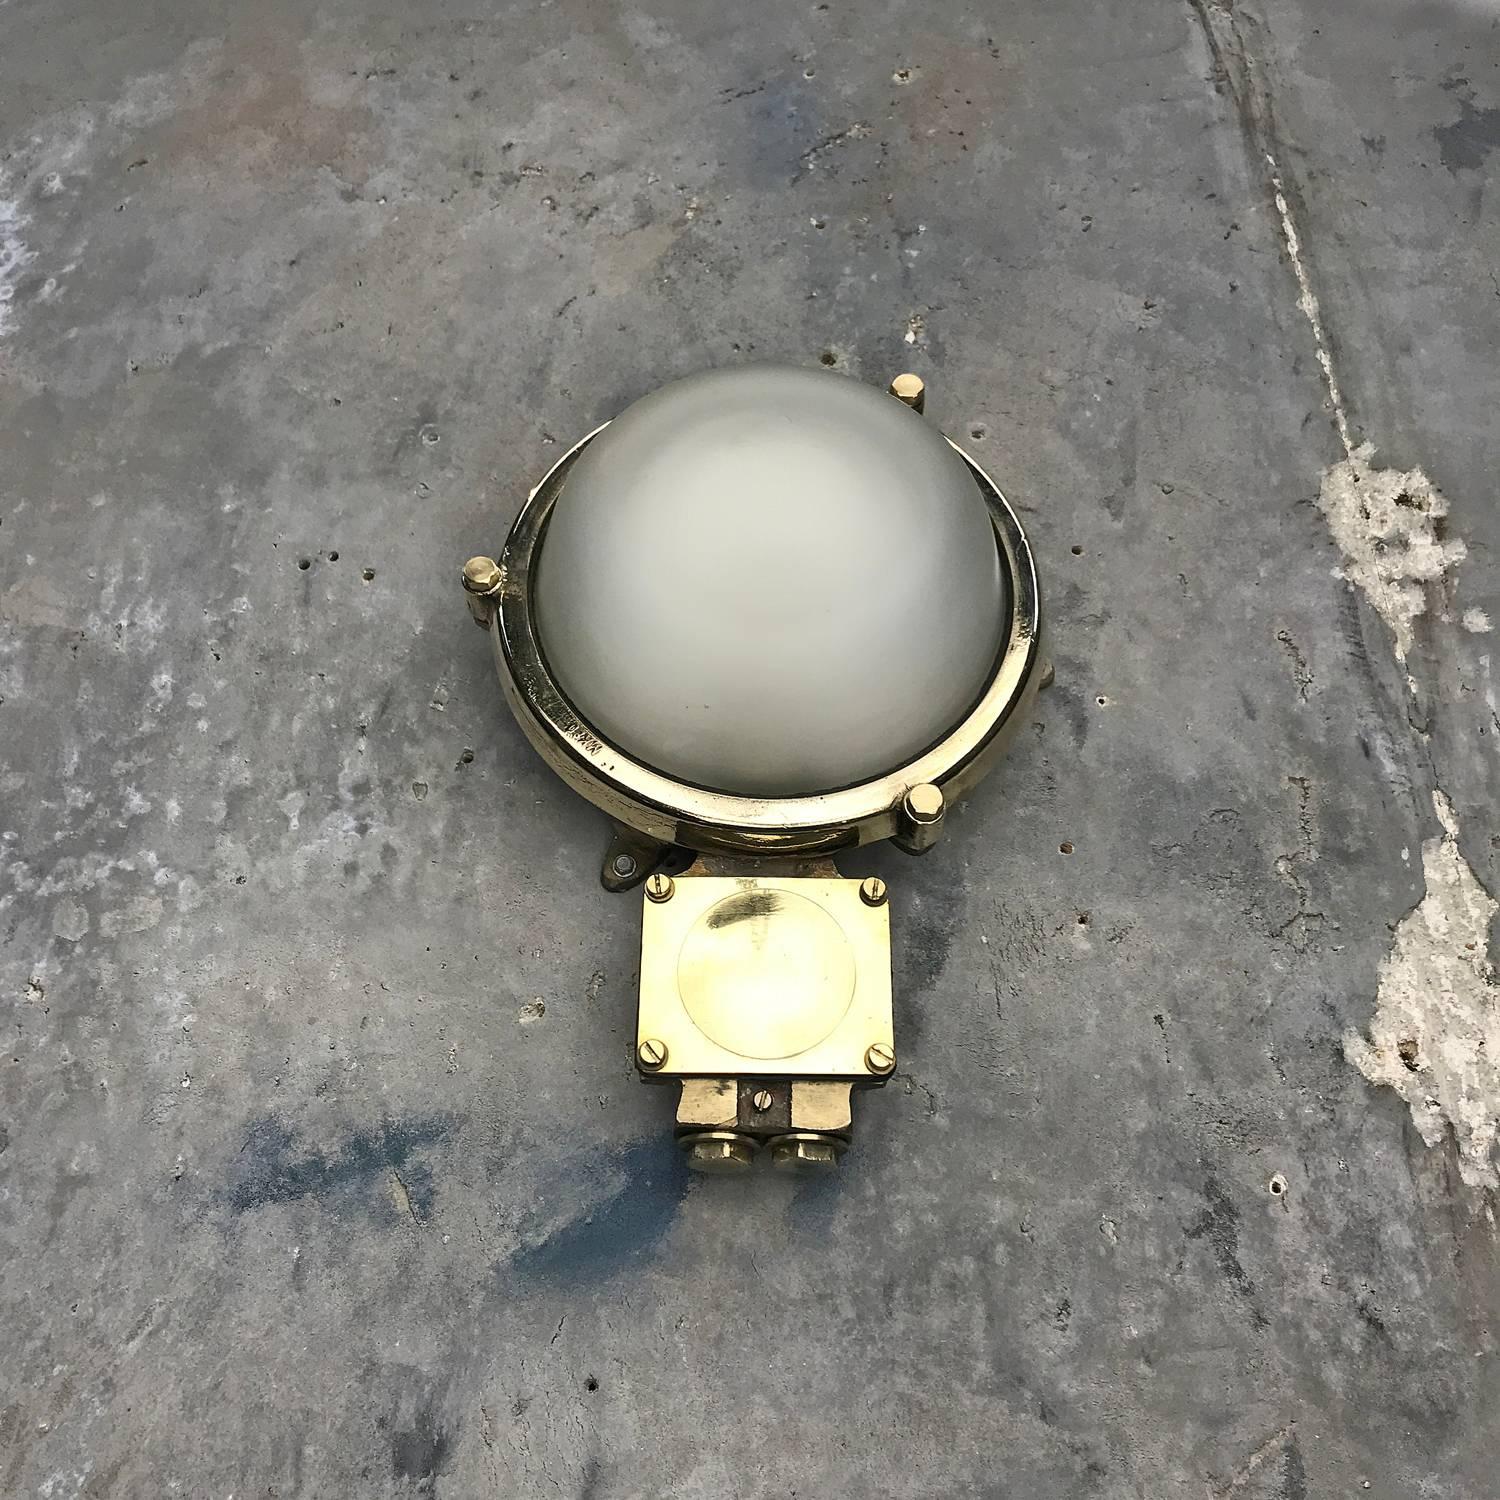 1970s German Industrial Cast Brass Circular Wall Light, Frosted Glass Shade 9